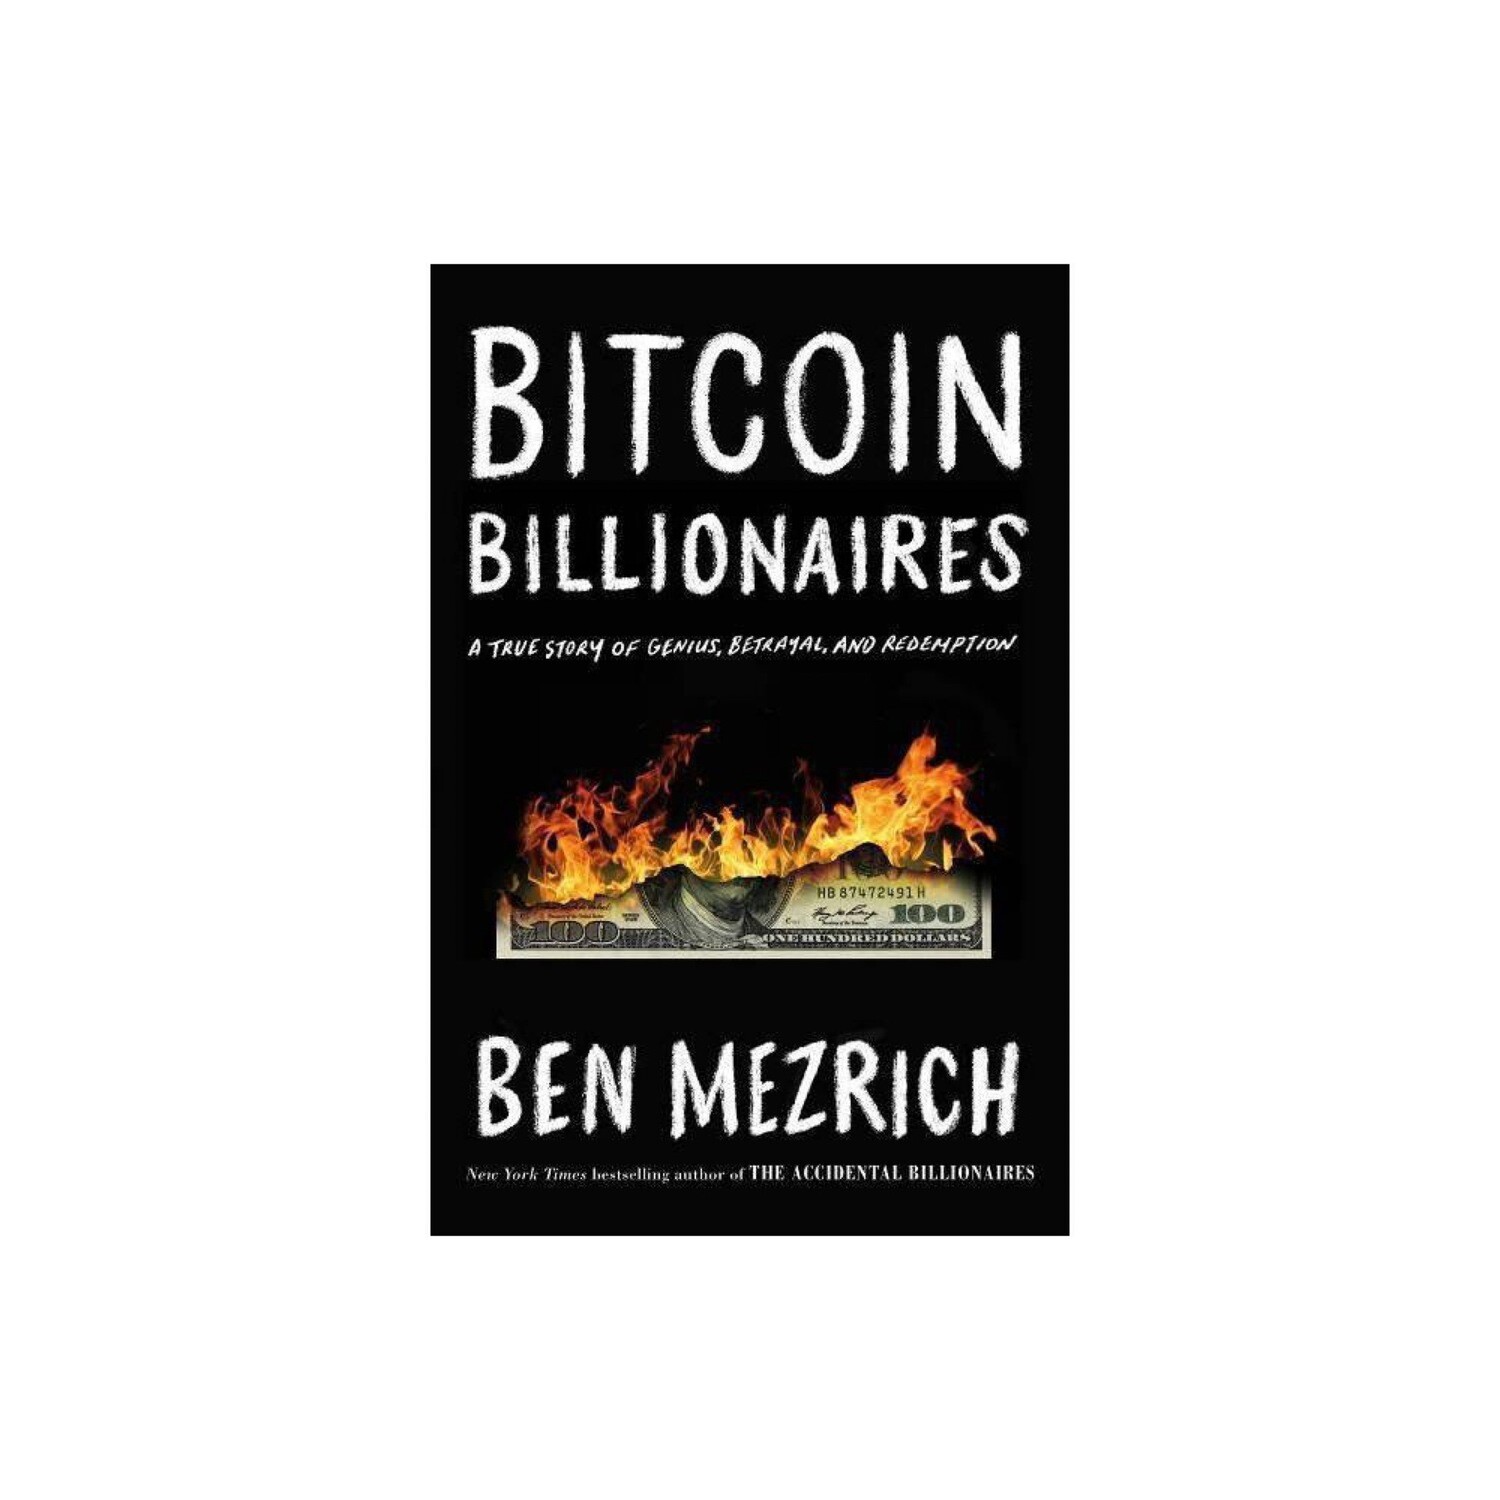 Bitcoin Billionaires: A true story of genius, betrayal, and redemption